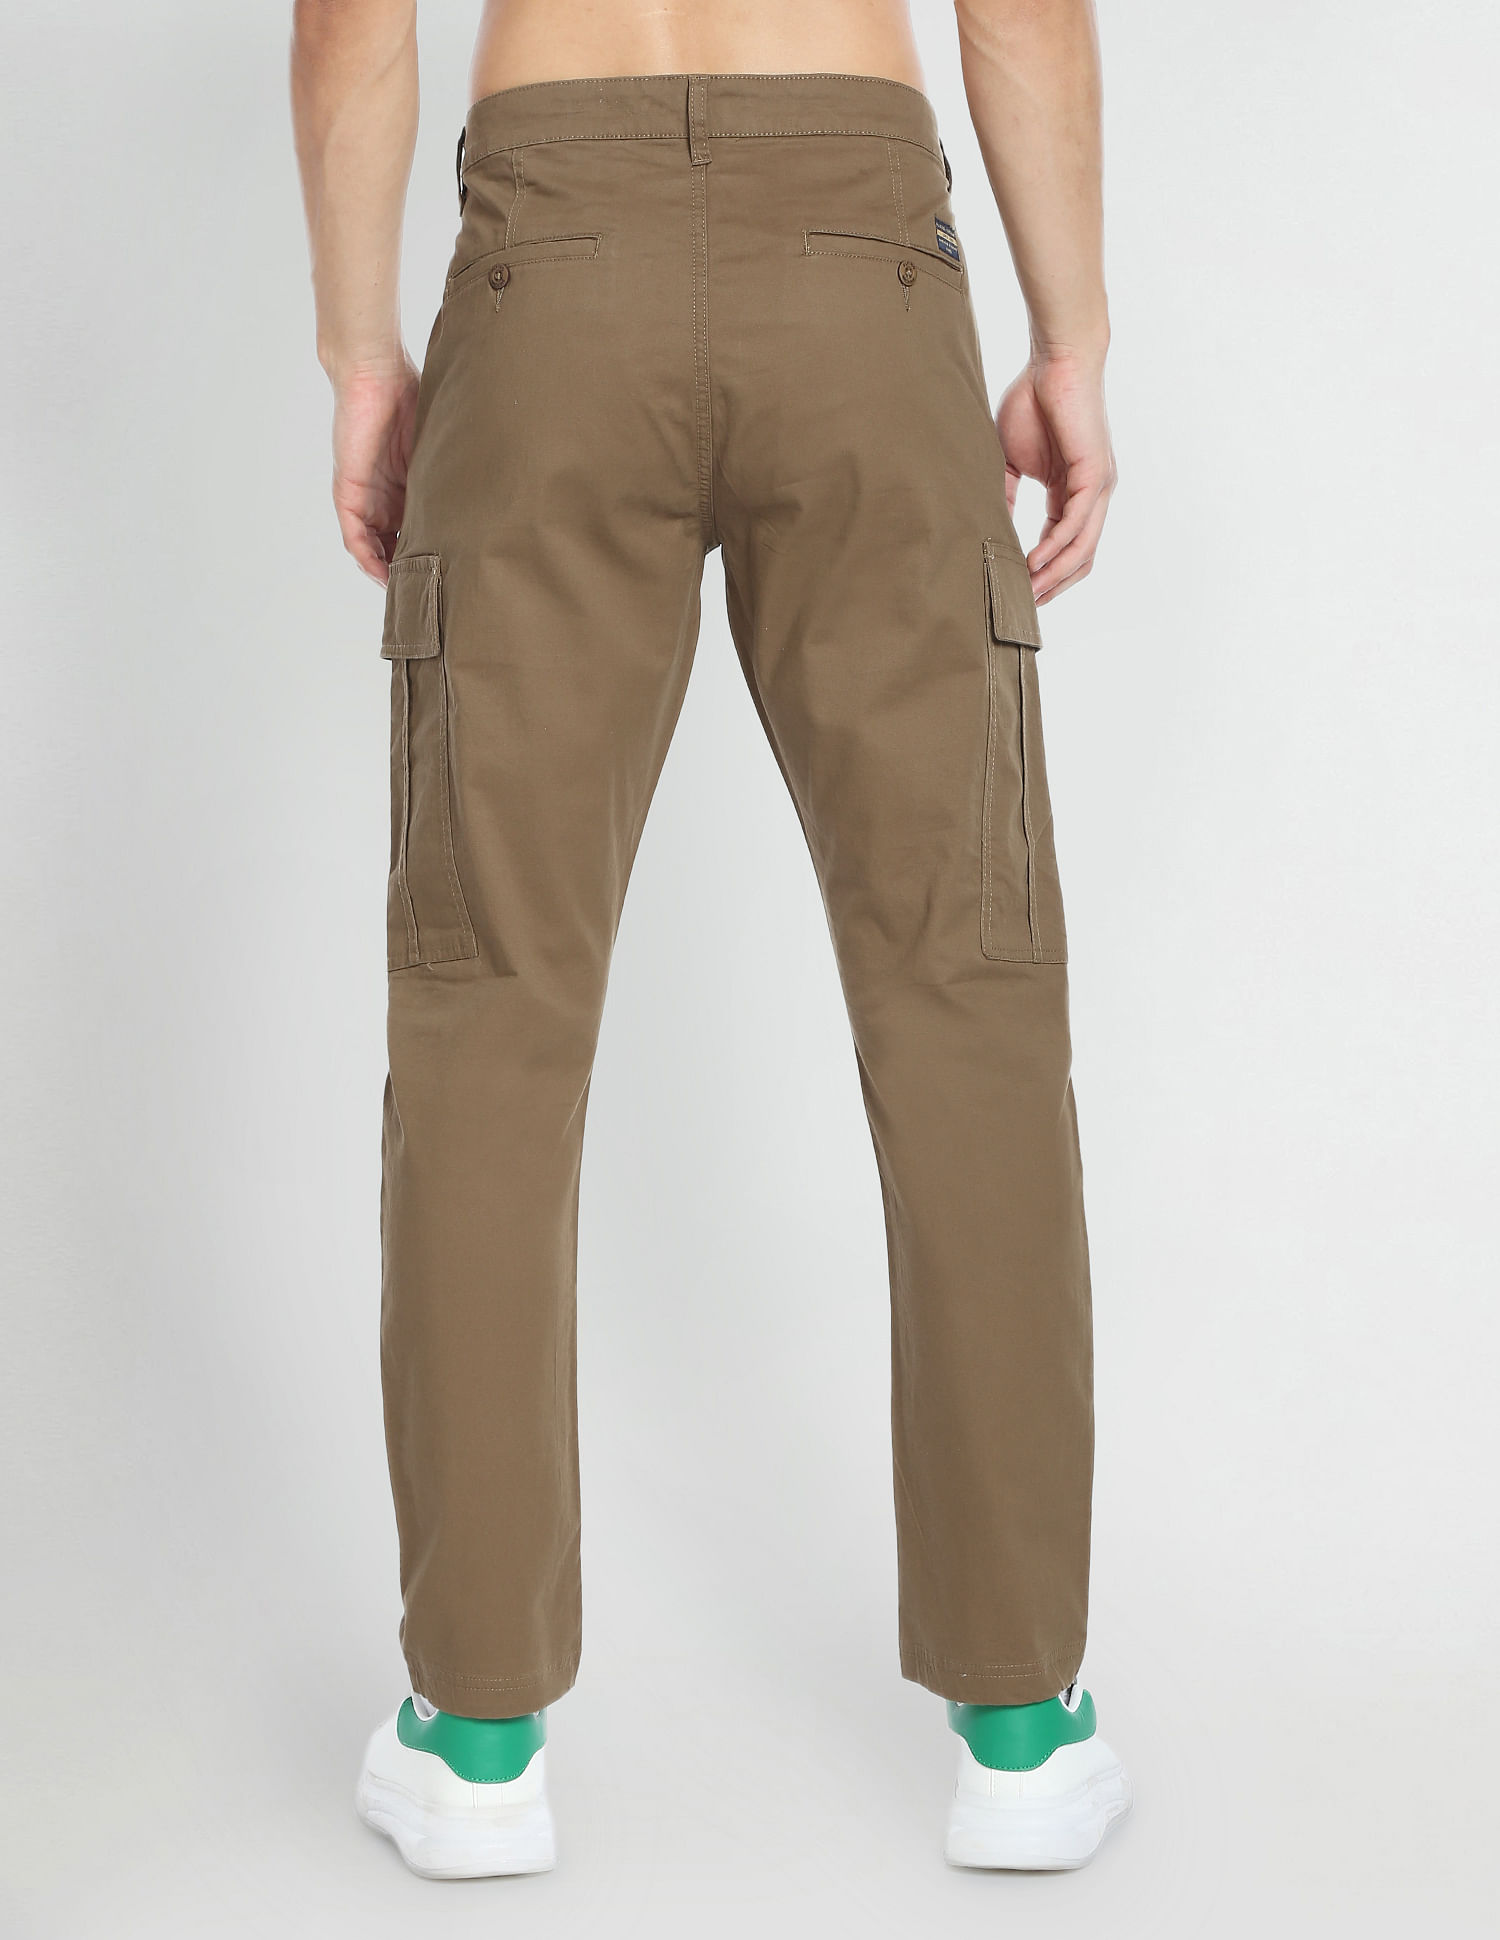 FLEX Relaxed Fit Straight Leg Cargo Pants For Men | Relaxed Fit Cargo |  Dickies - Dickies US